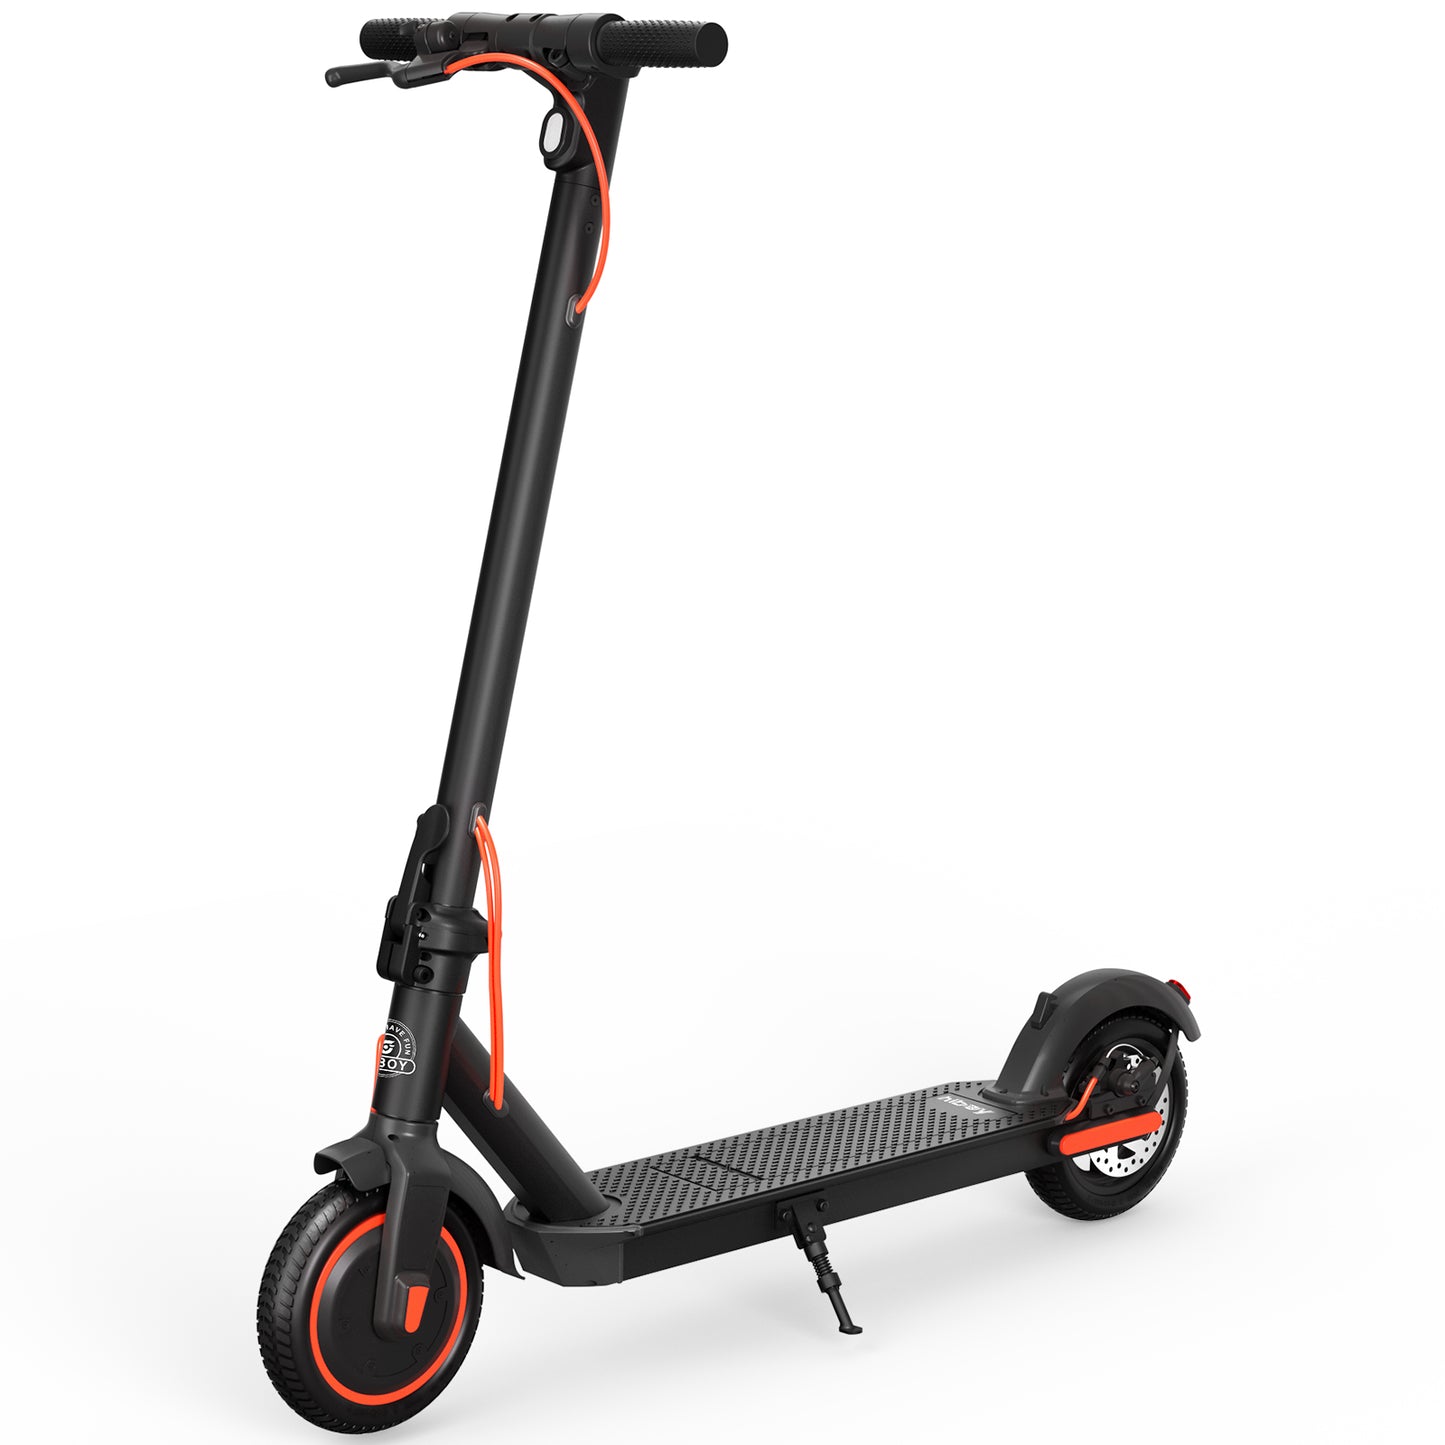 Hiboy S2R Refurbished Electric Scooter